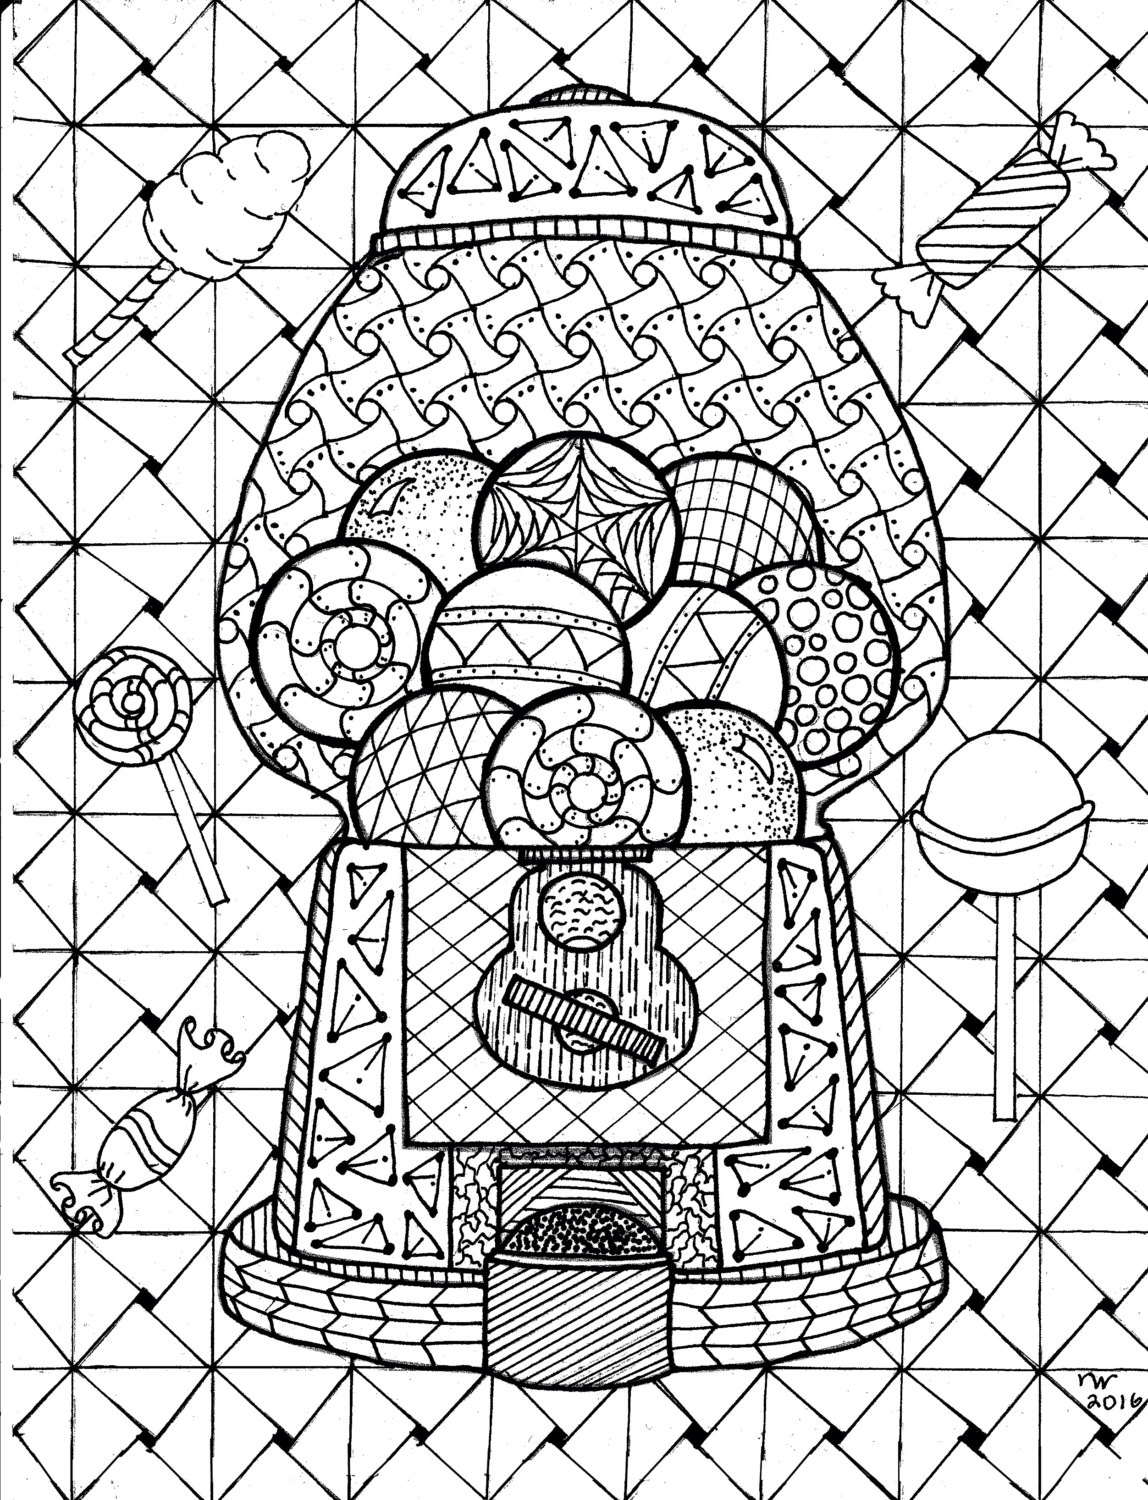 Gumball Machine Coloring Page At GetColorings Free Printable 